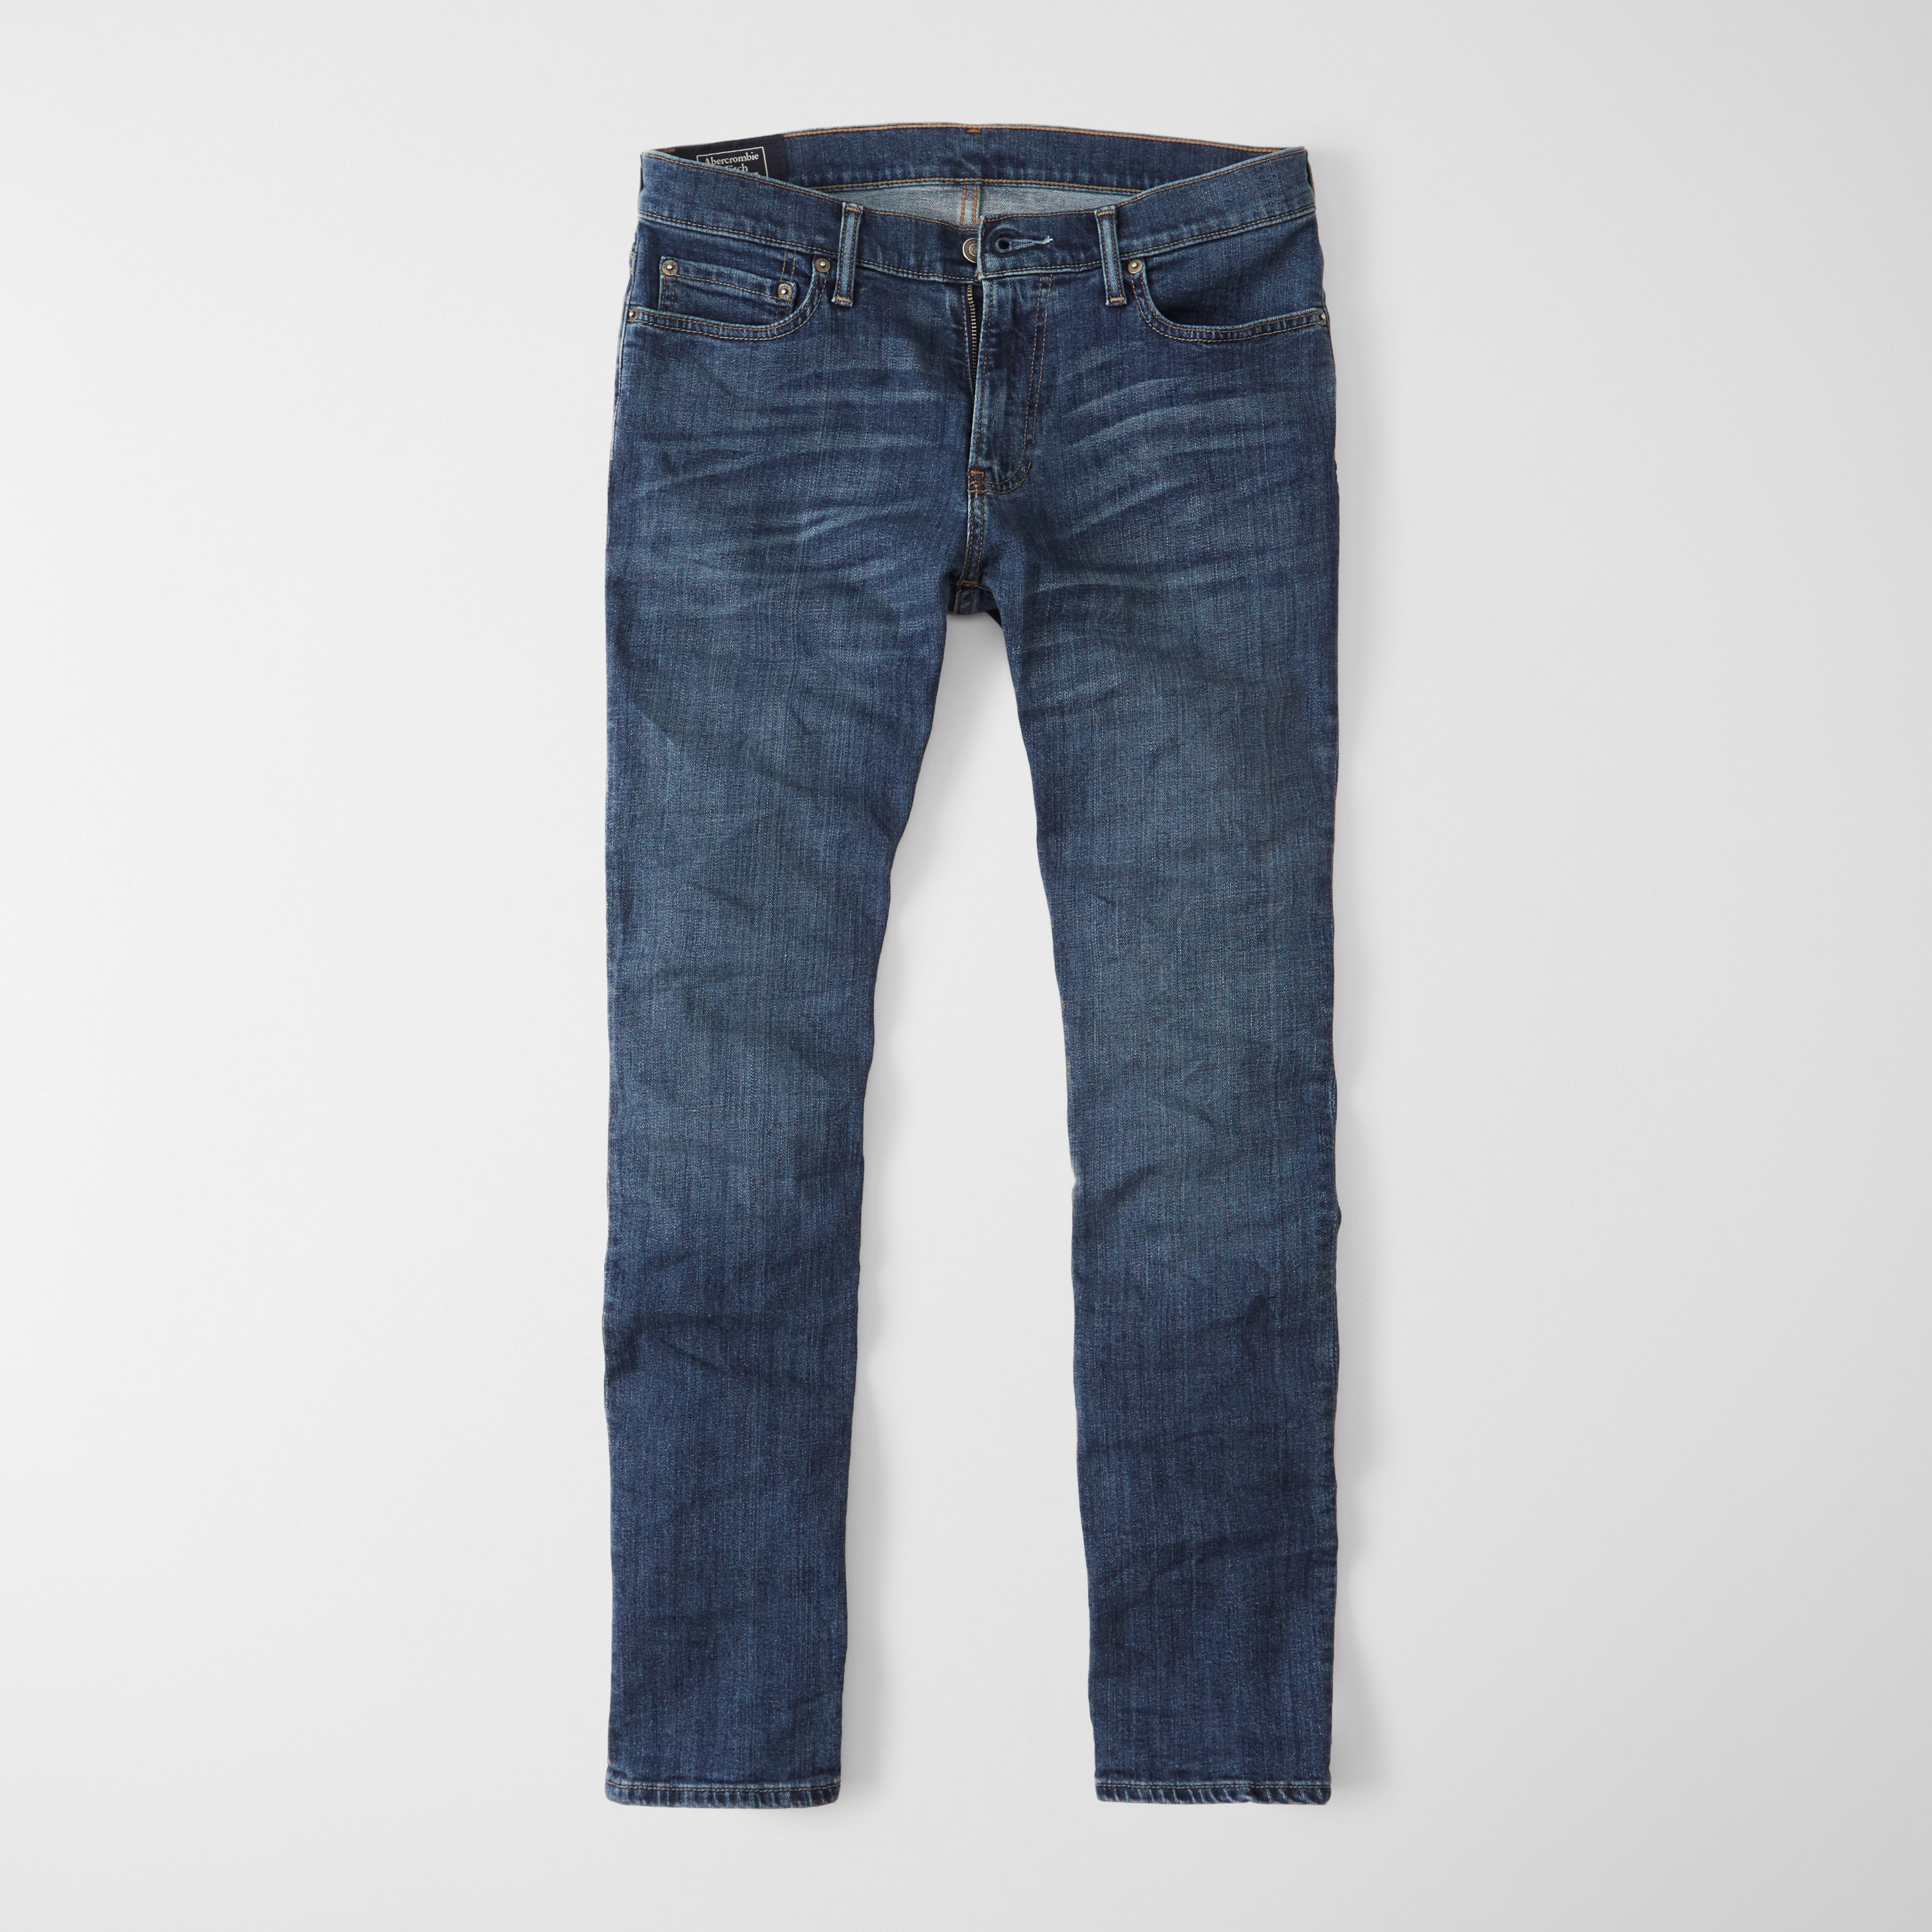 abercrombie fitch mens jeans